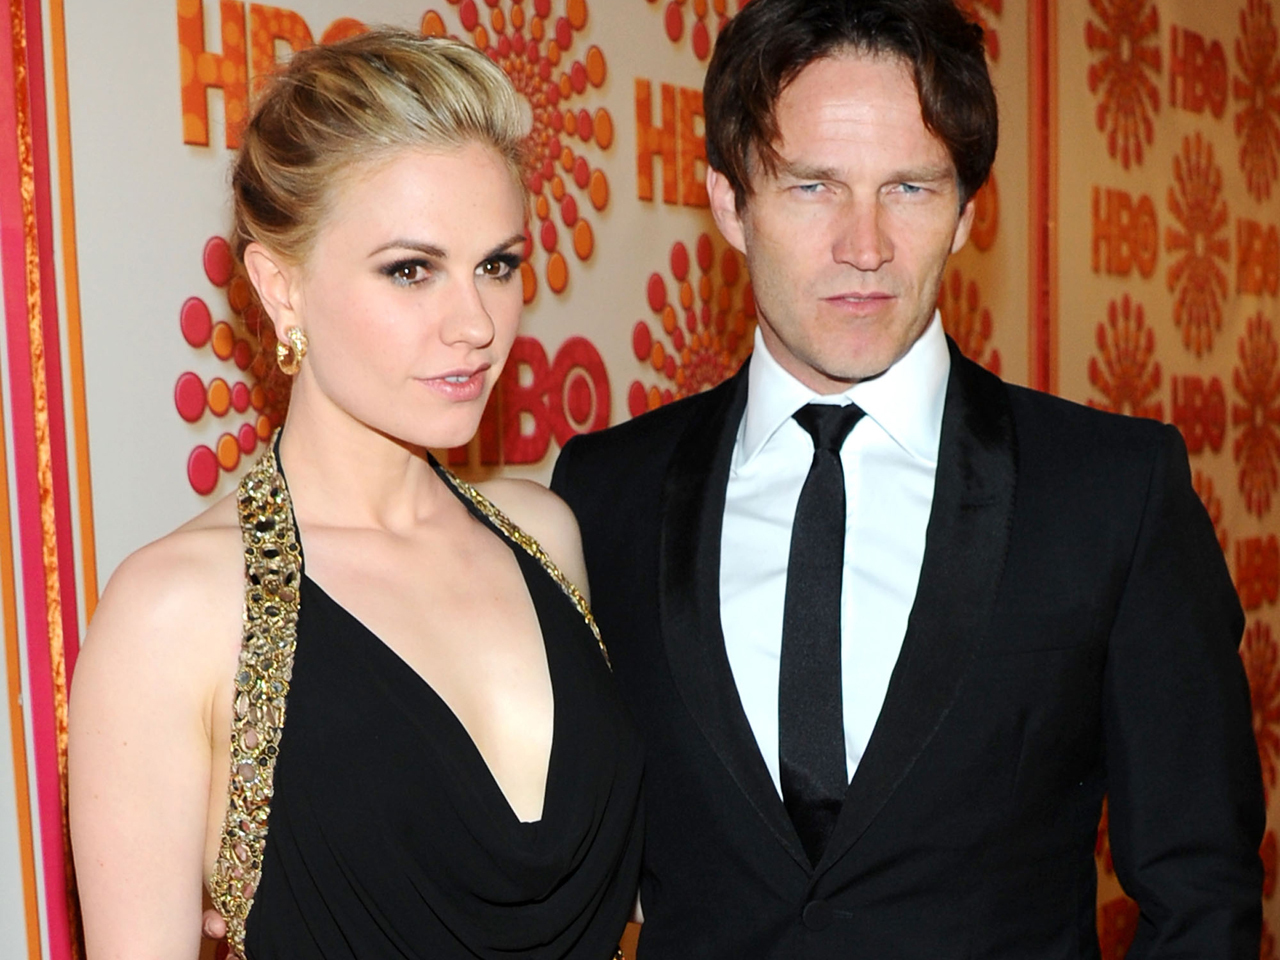 Anna Paquin and Stephen Moyer expecting first child - CBS News